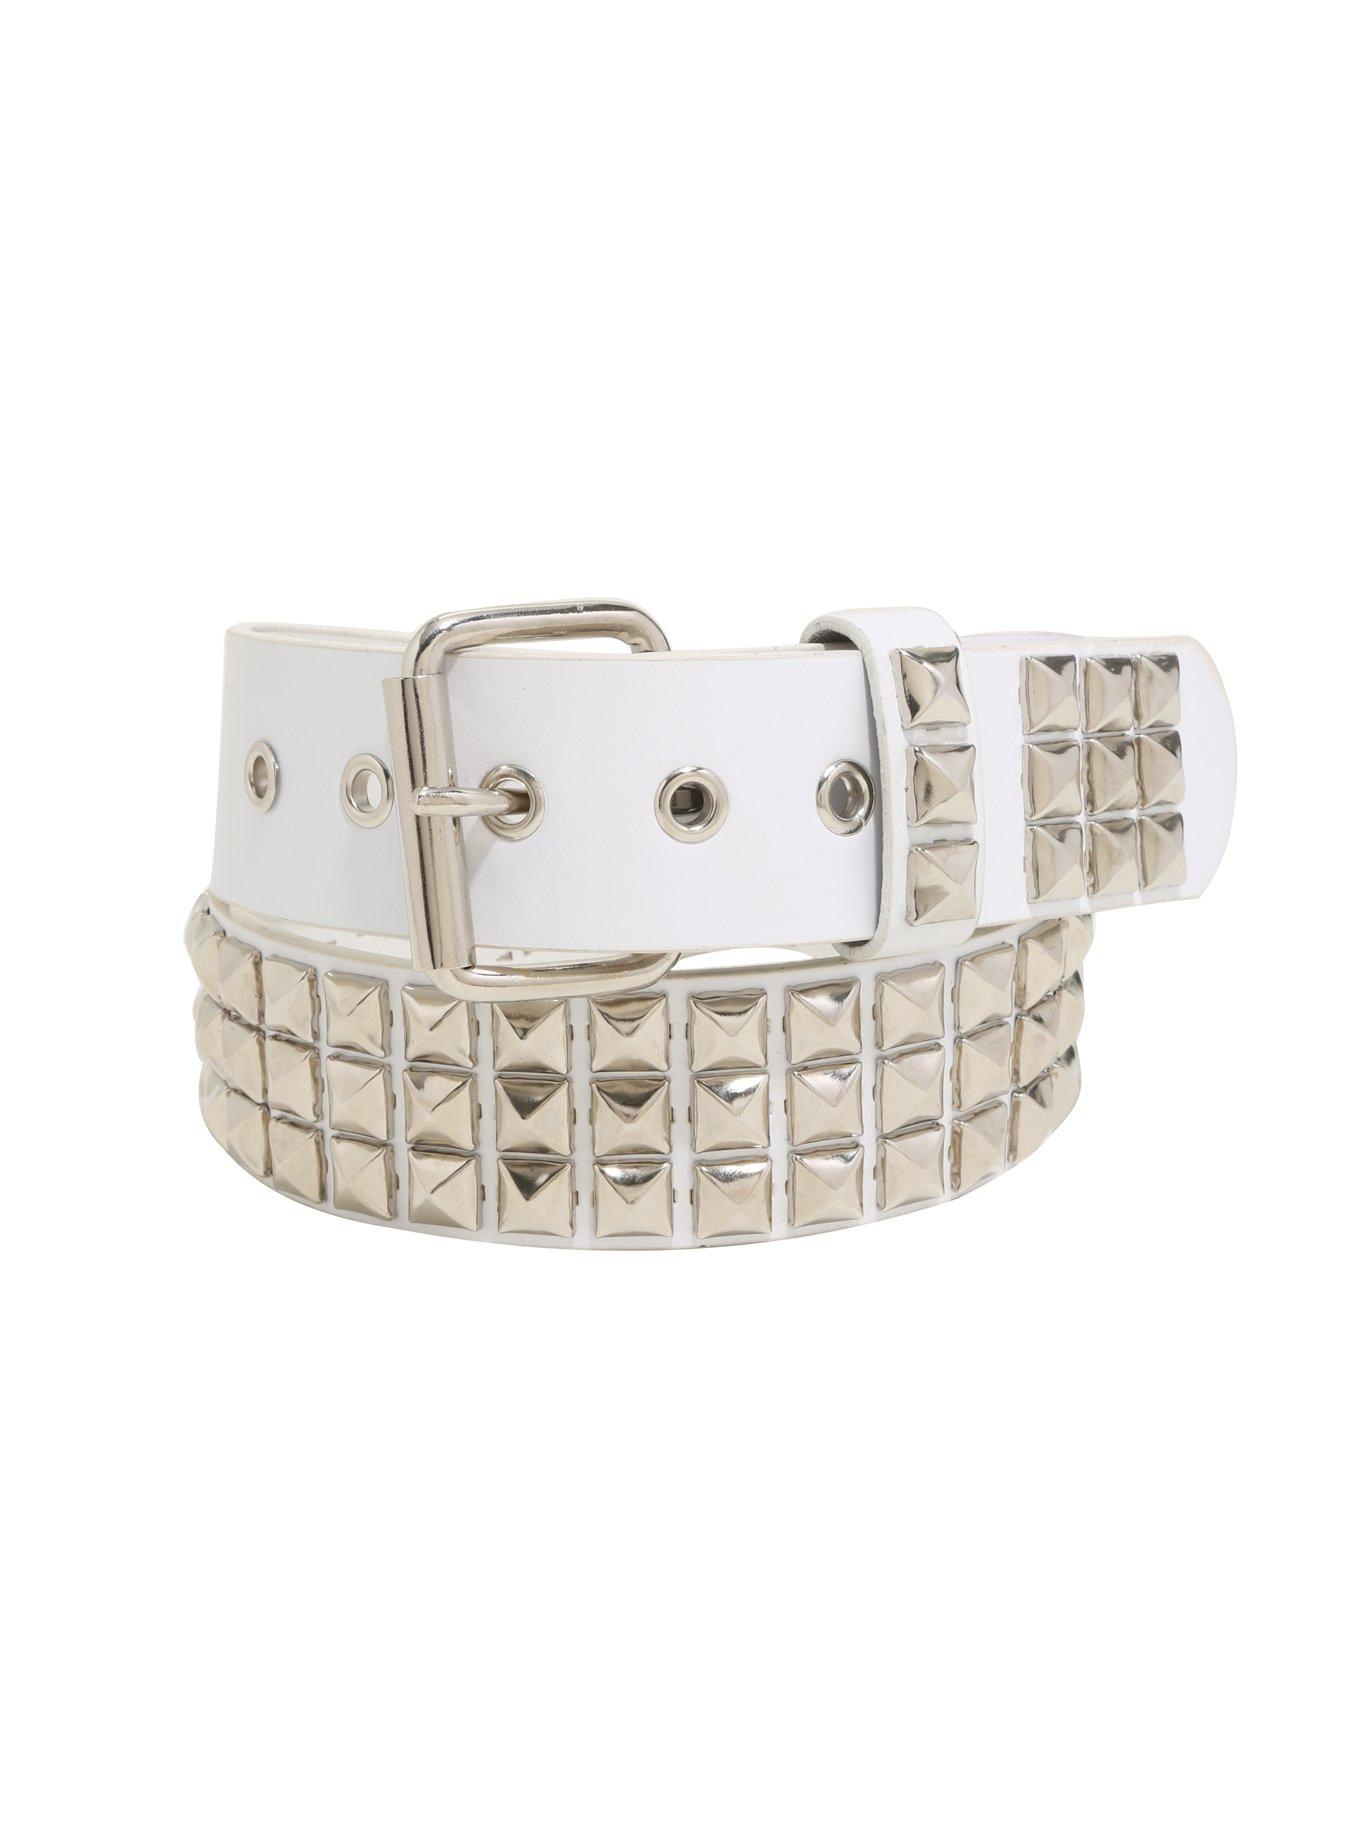 White Faux Leather 3 Row Pyramid Stud Belt | Hot Topic